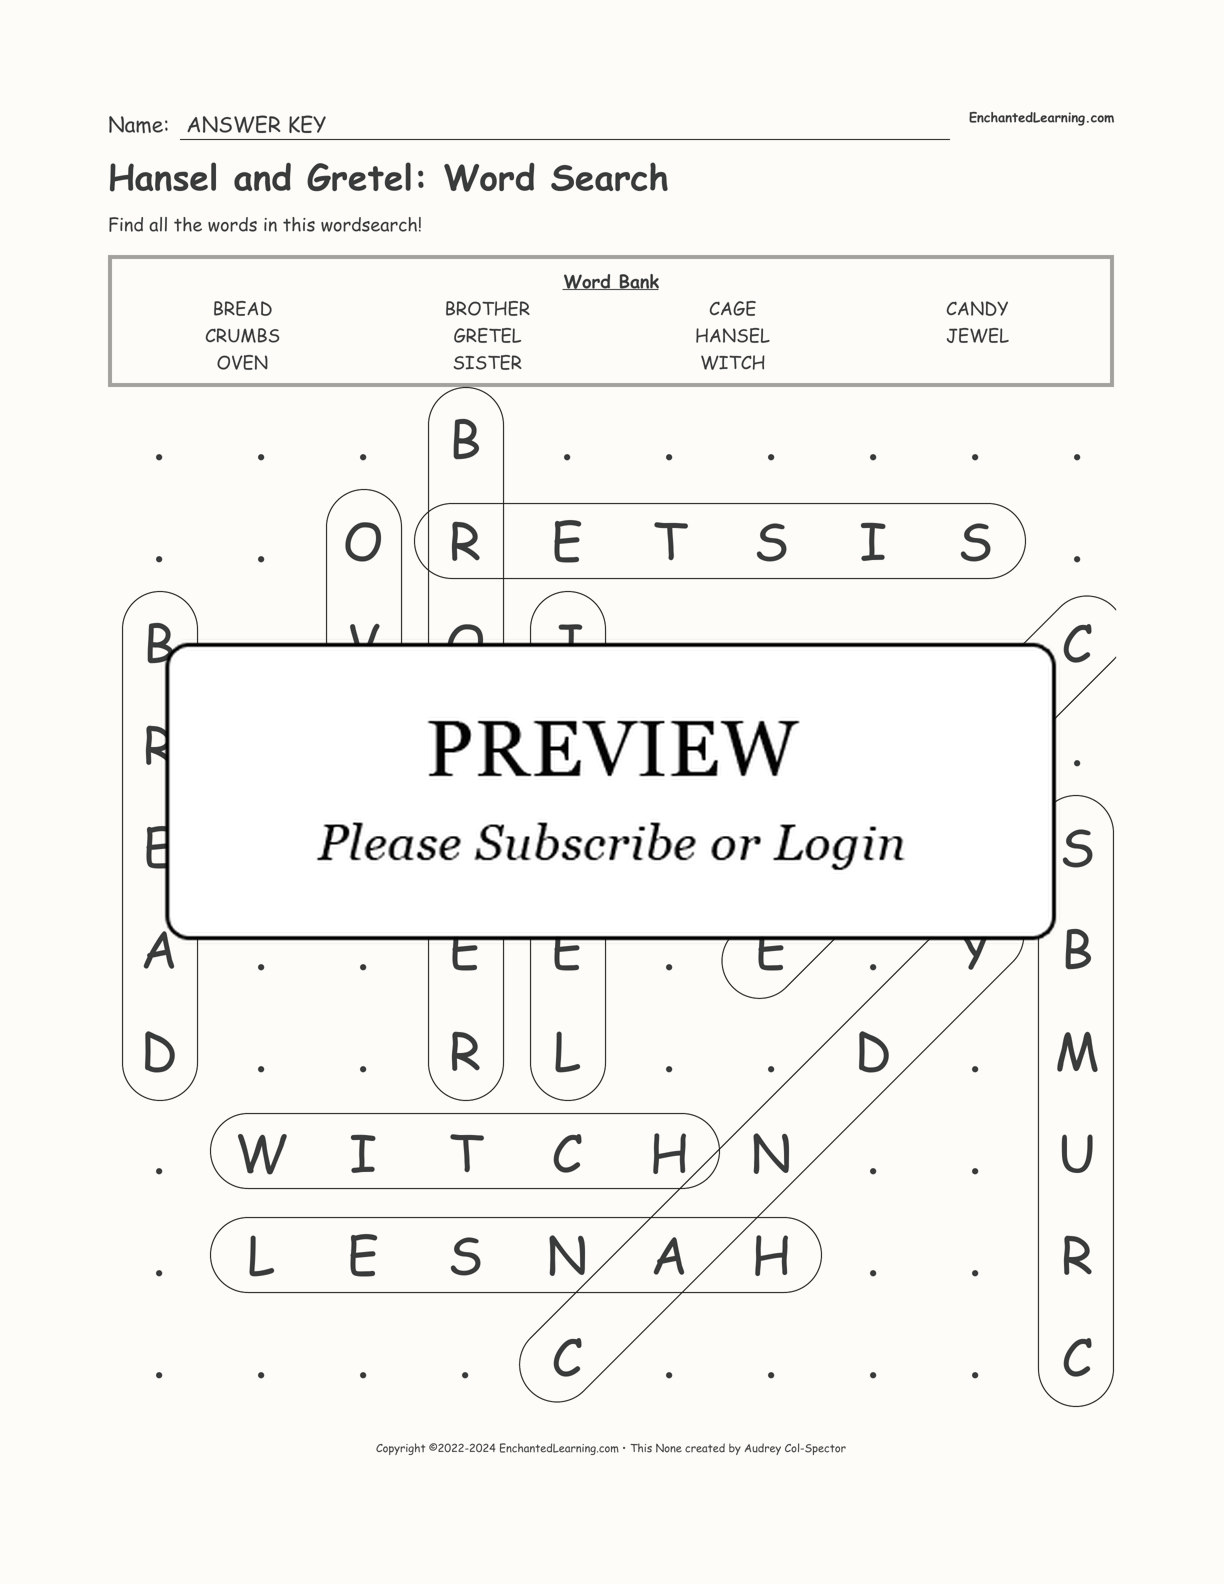 Hansel and Gretel: Word Search interactive worksheet page 2